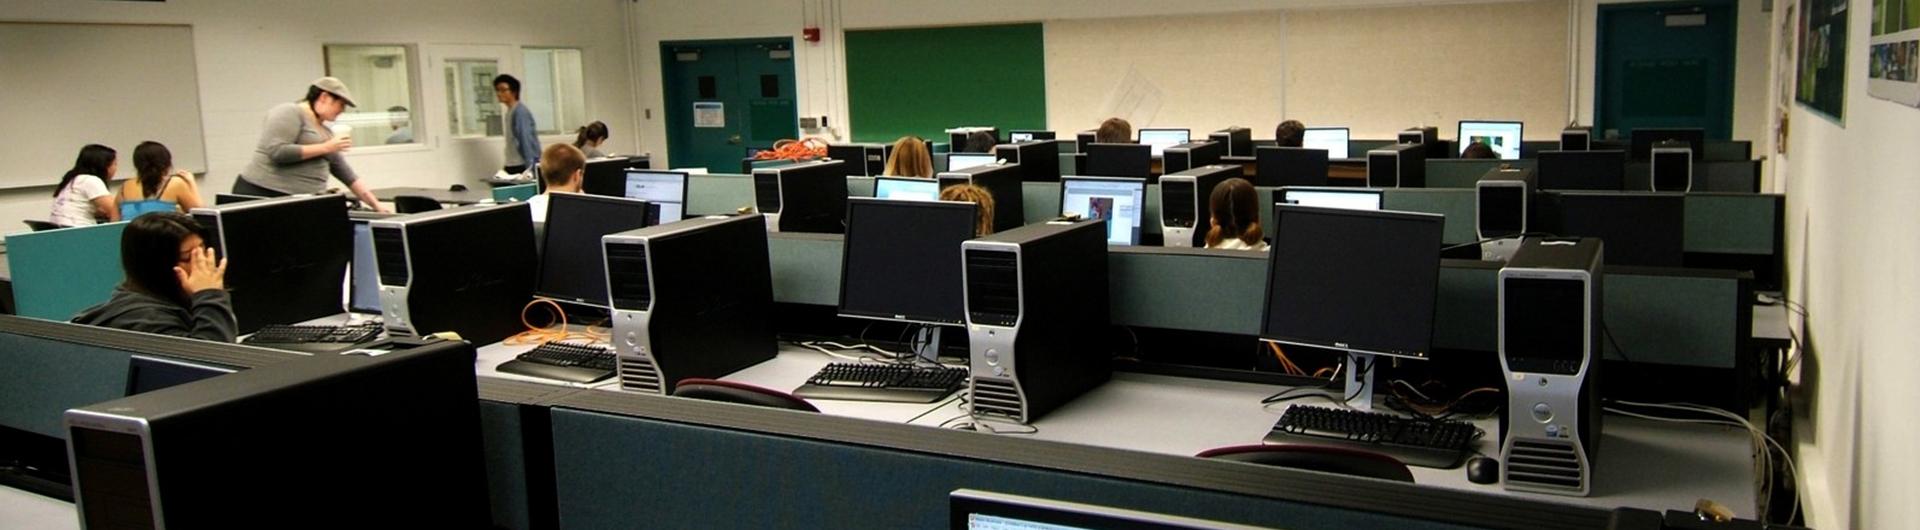 Computer lab with instructor and students